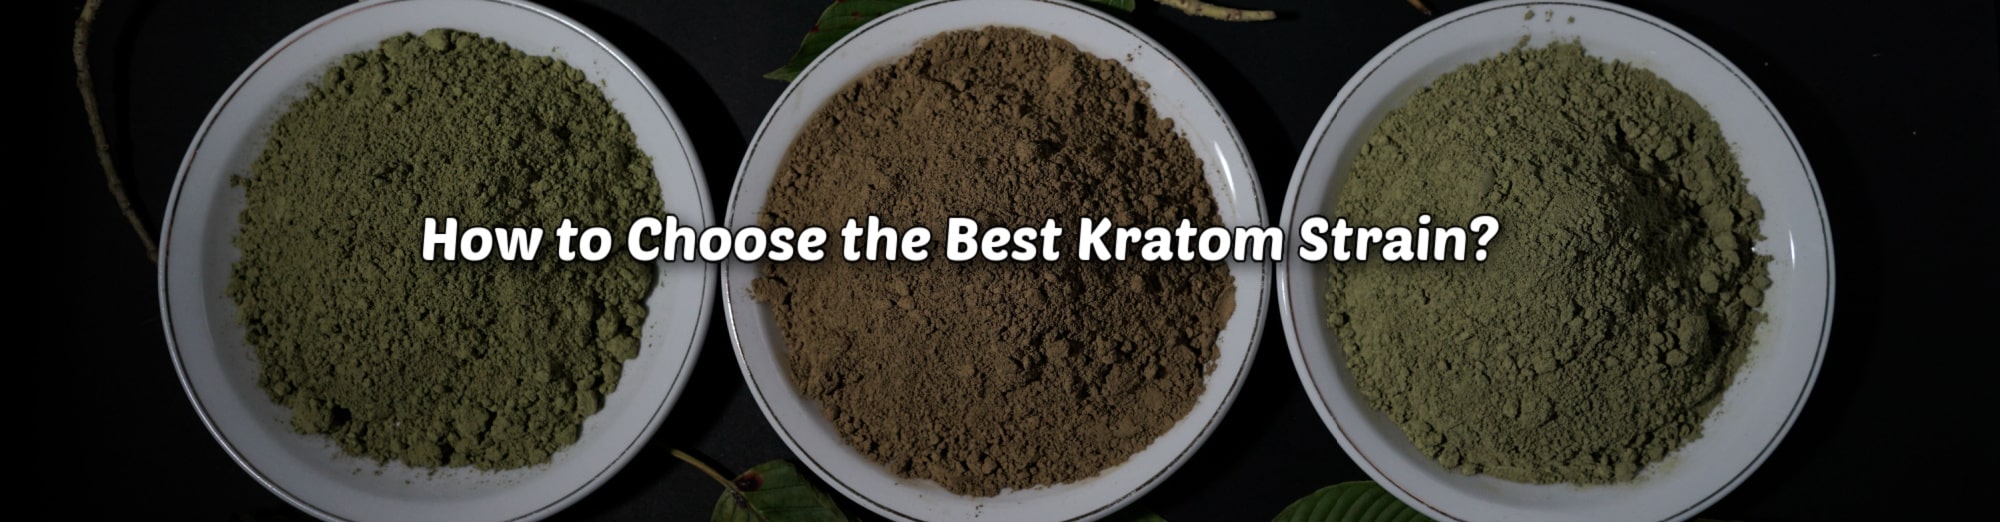 image of how to choose the best kratom strain